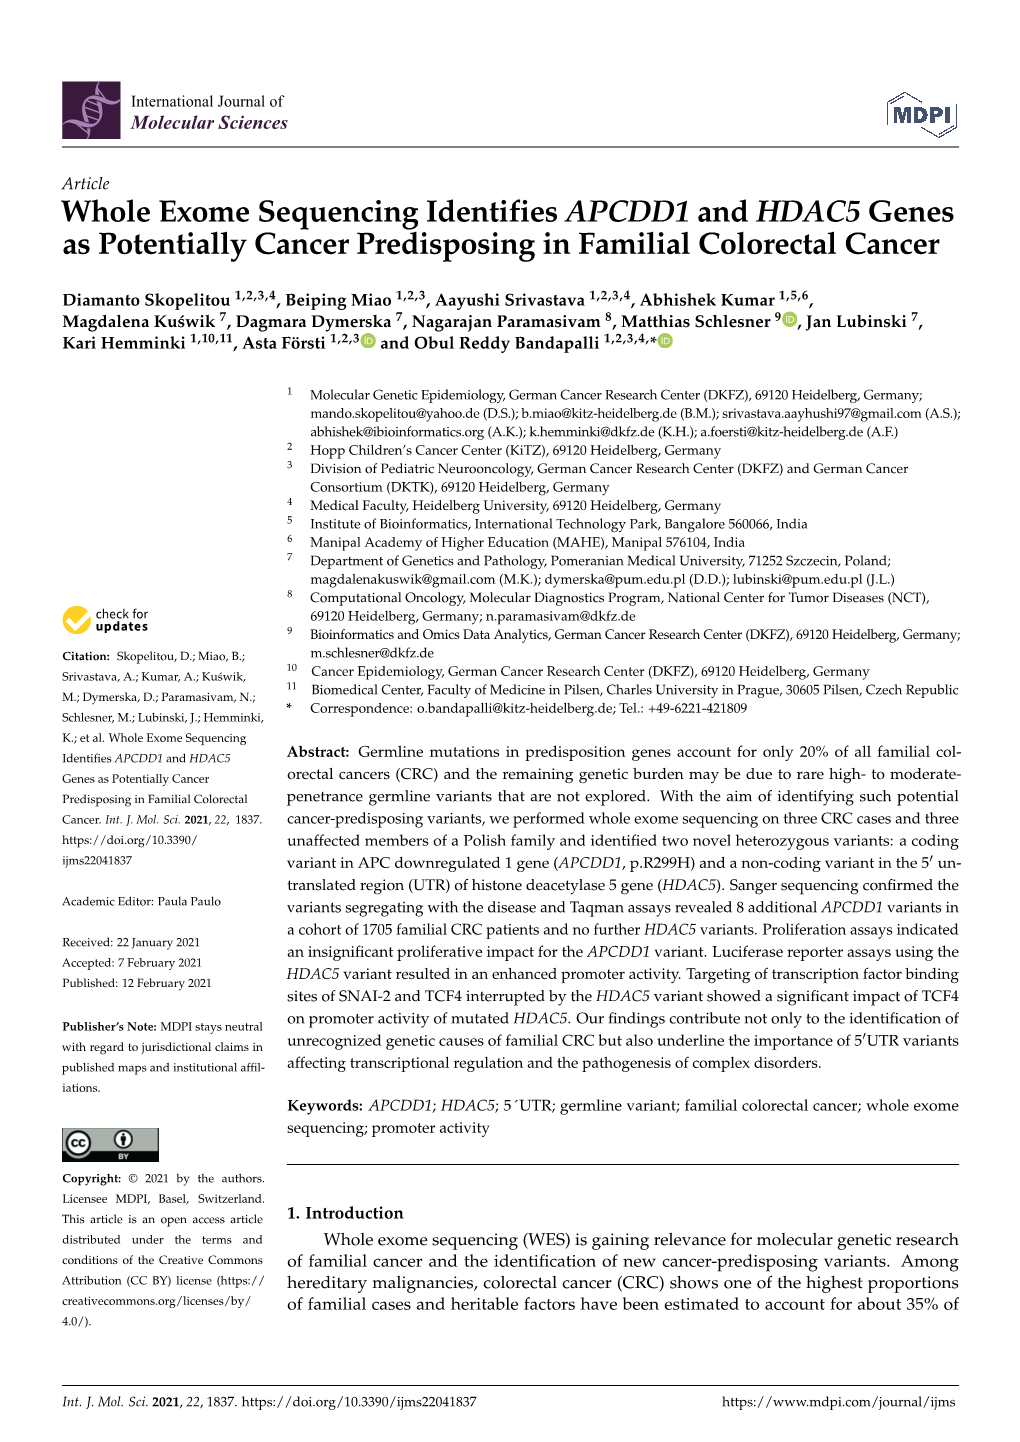 Whole Exome Sequencing Identifies APCDD1 and HDAC5 Genes As Potentially Cancer Predisposing in Familial Colorectal Cancer